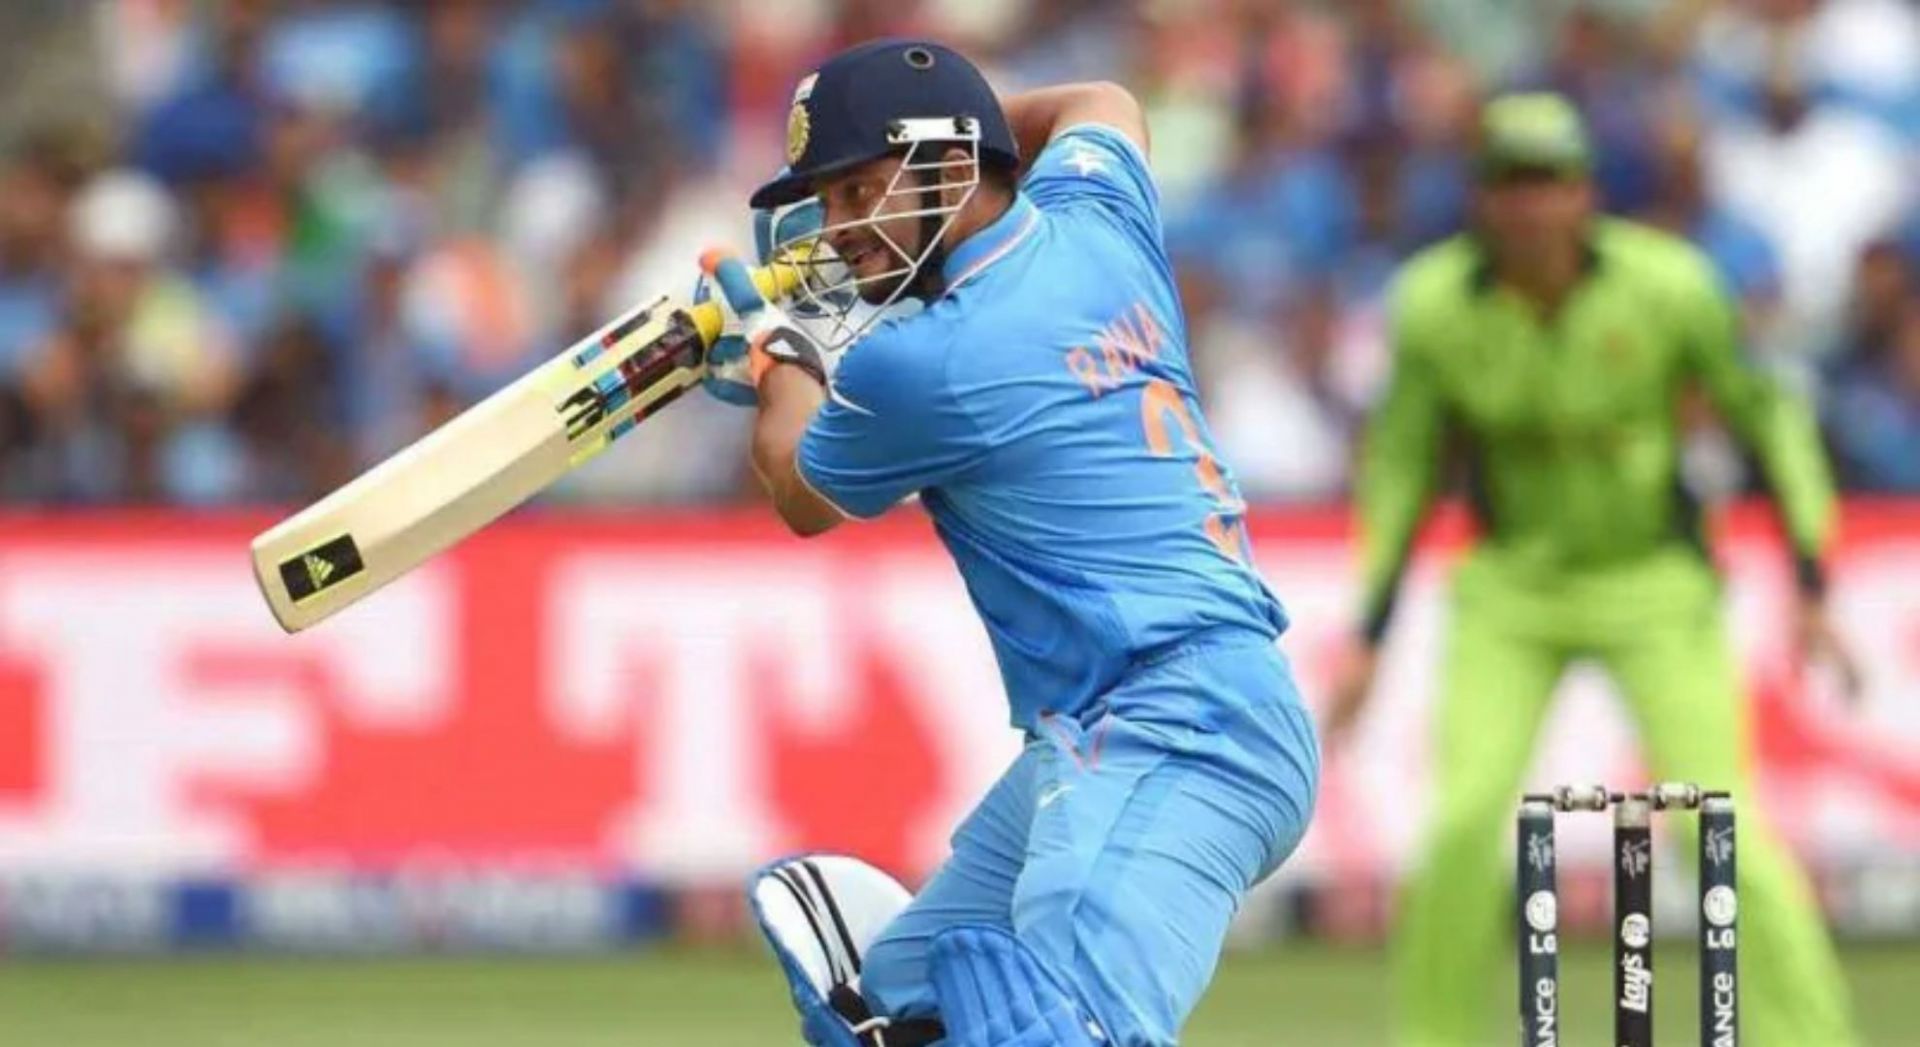 Suresh Raina stepped up in the middle order against Pakistan in 2015 World Cup.